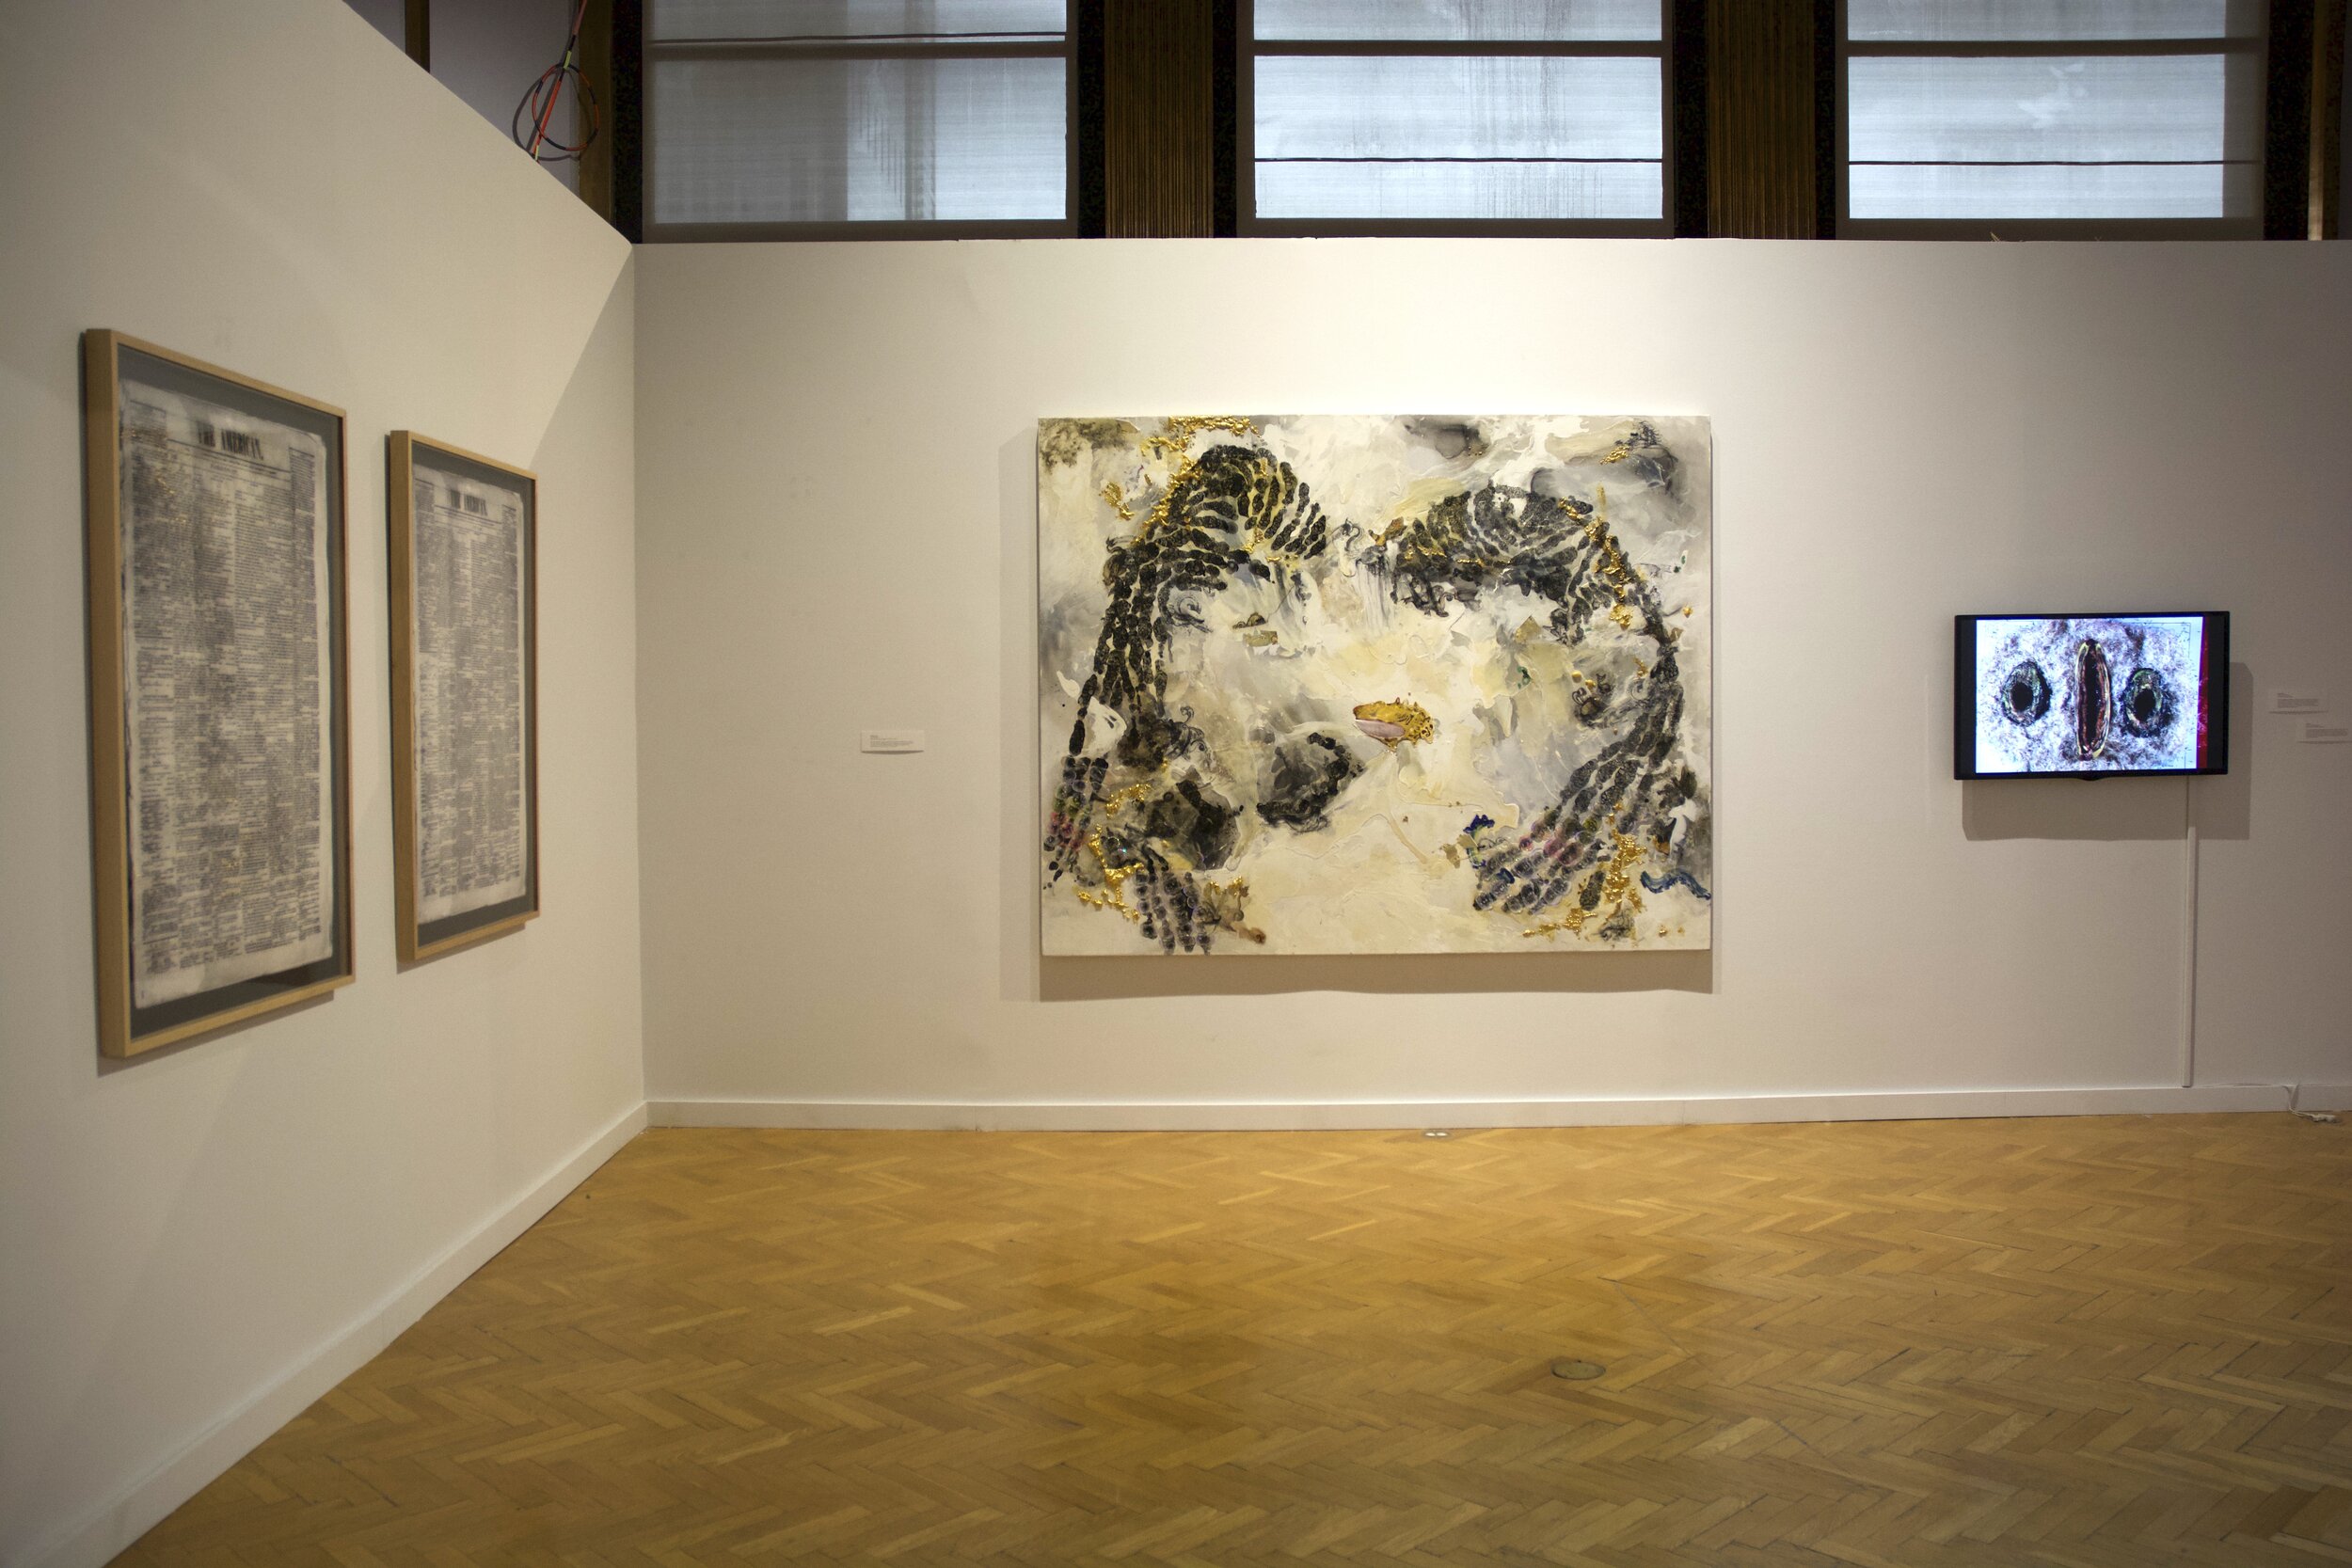  Installation view of works, left to right: Julietta Cheung, Sherwin Ovid, and Emilio Rojas. 